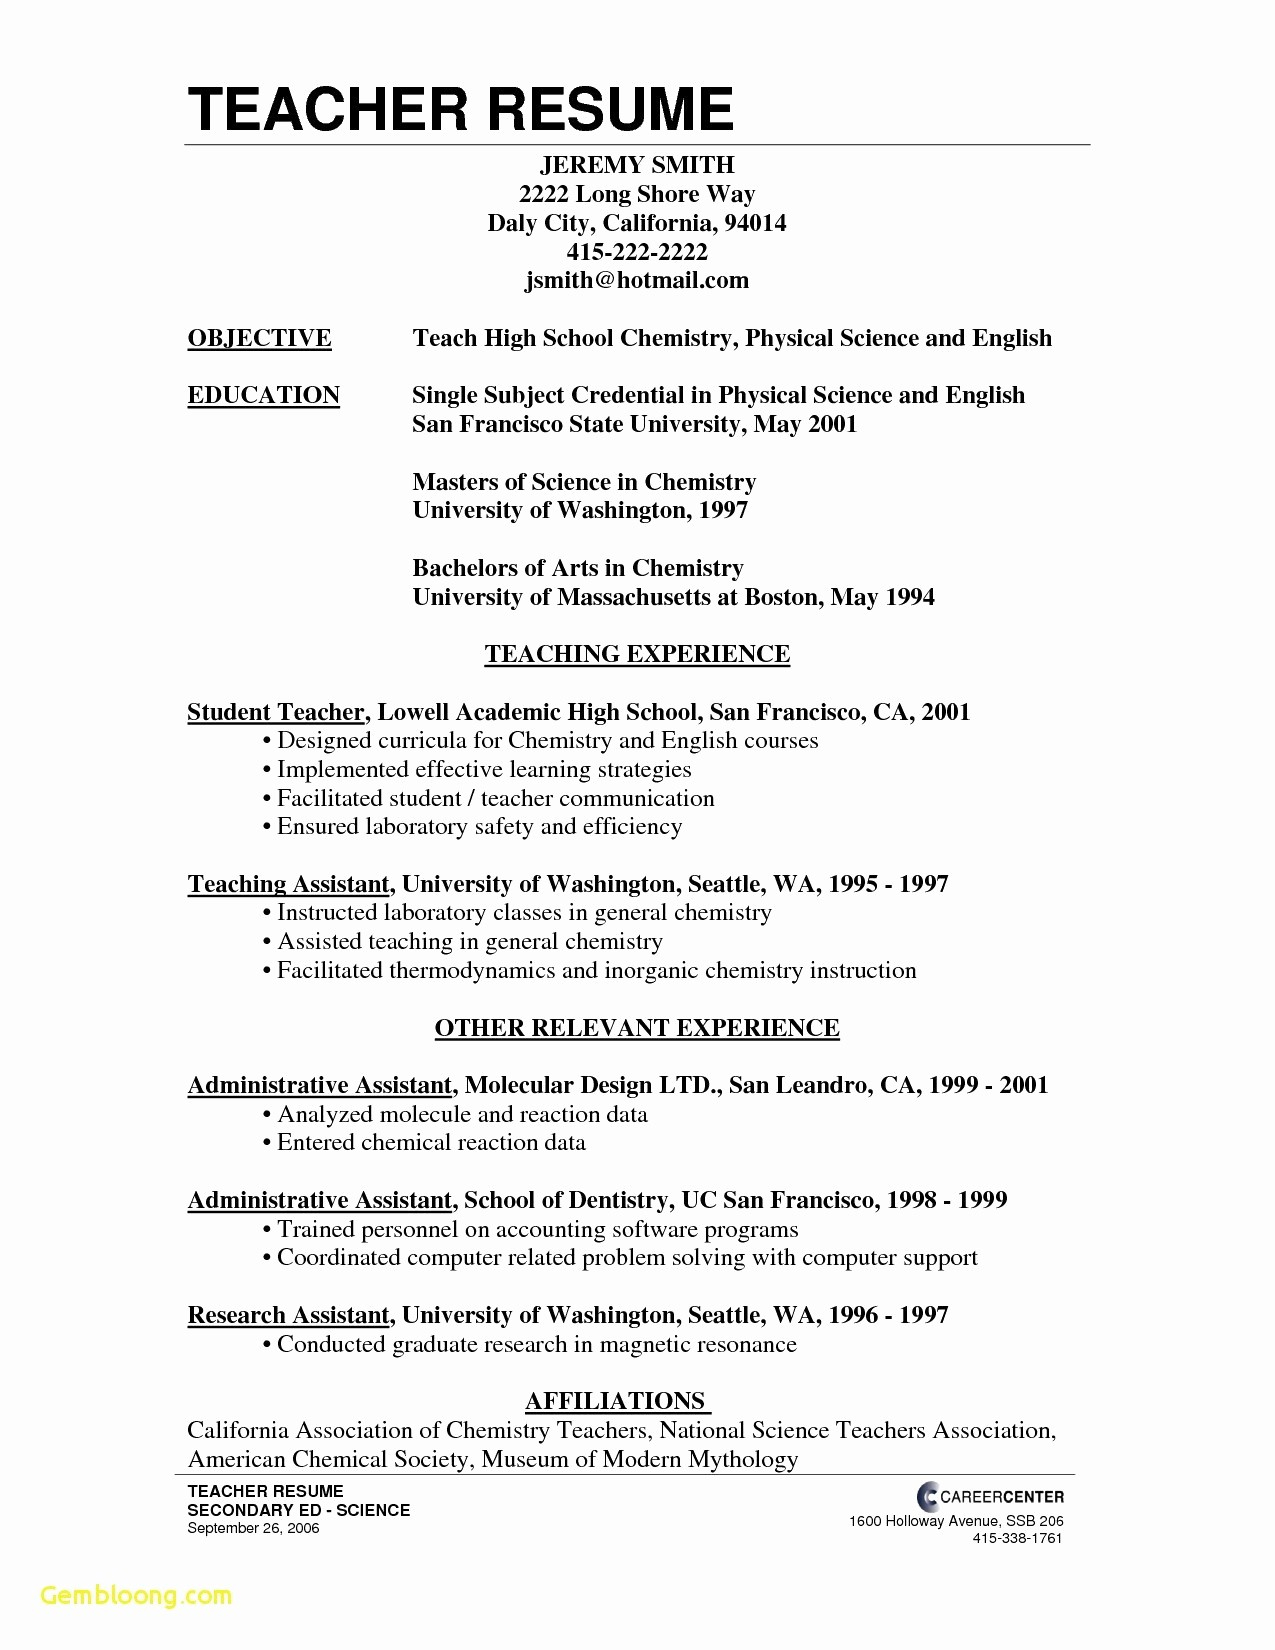 Career Change Resume Examples Of Resumes For Teachers Changing Careers Unique Resume